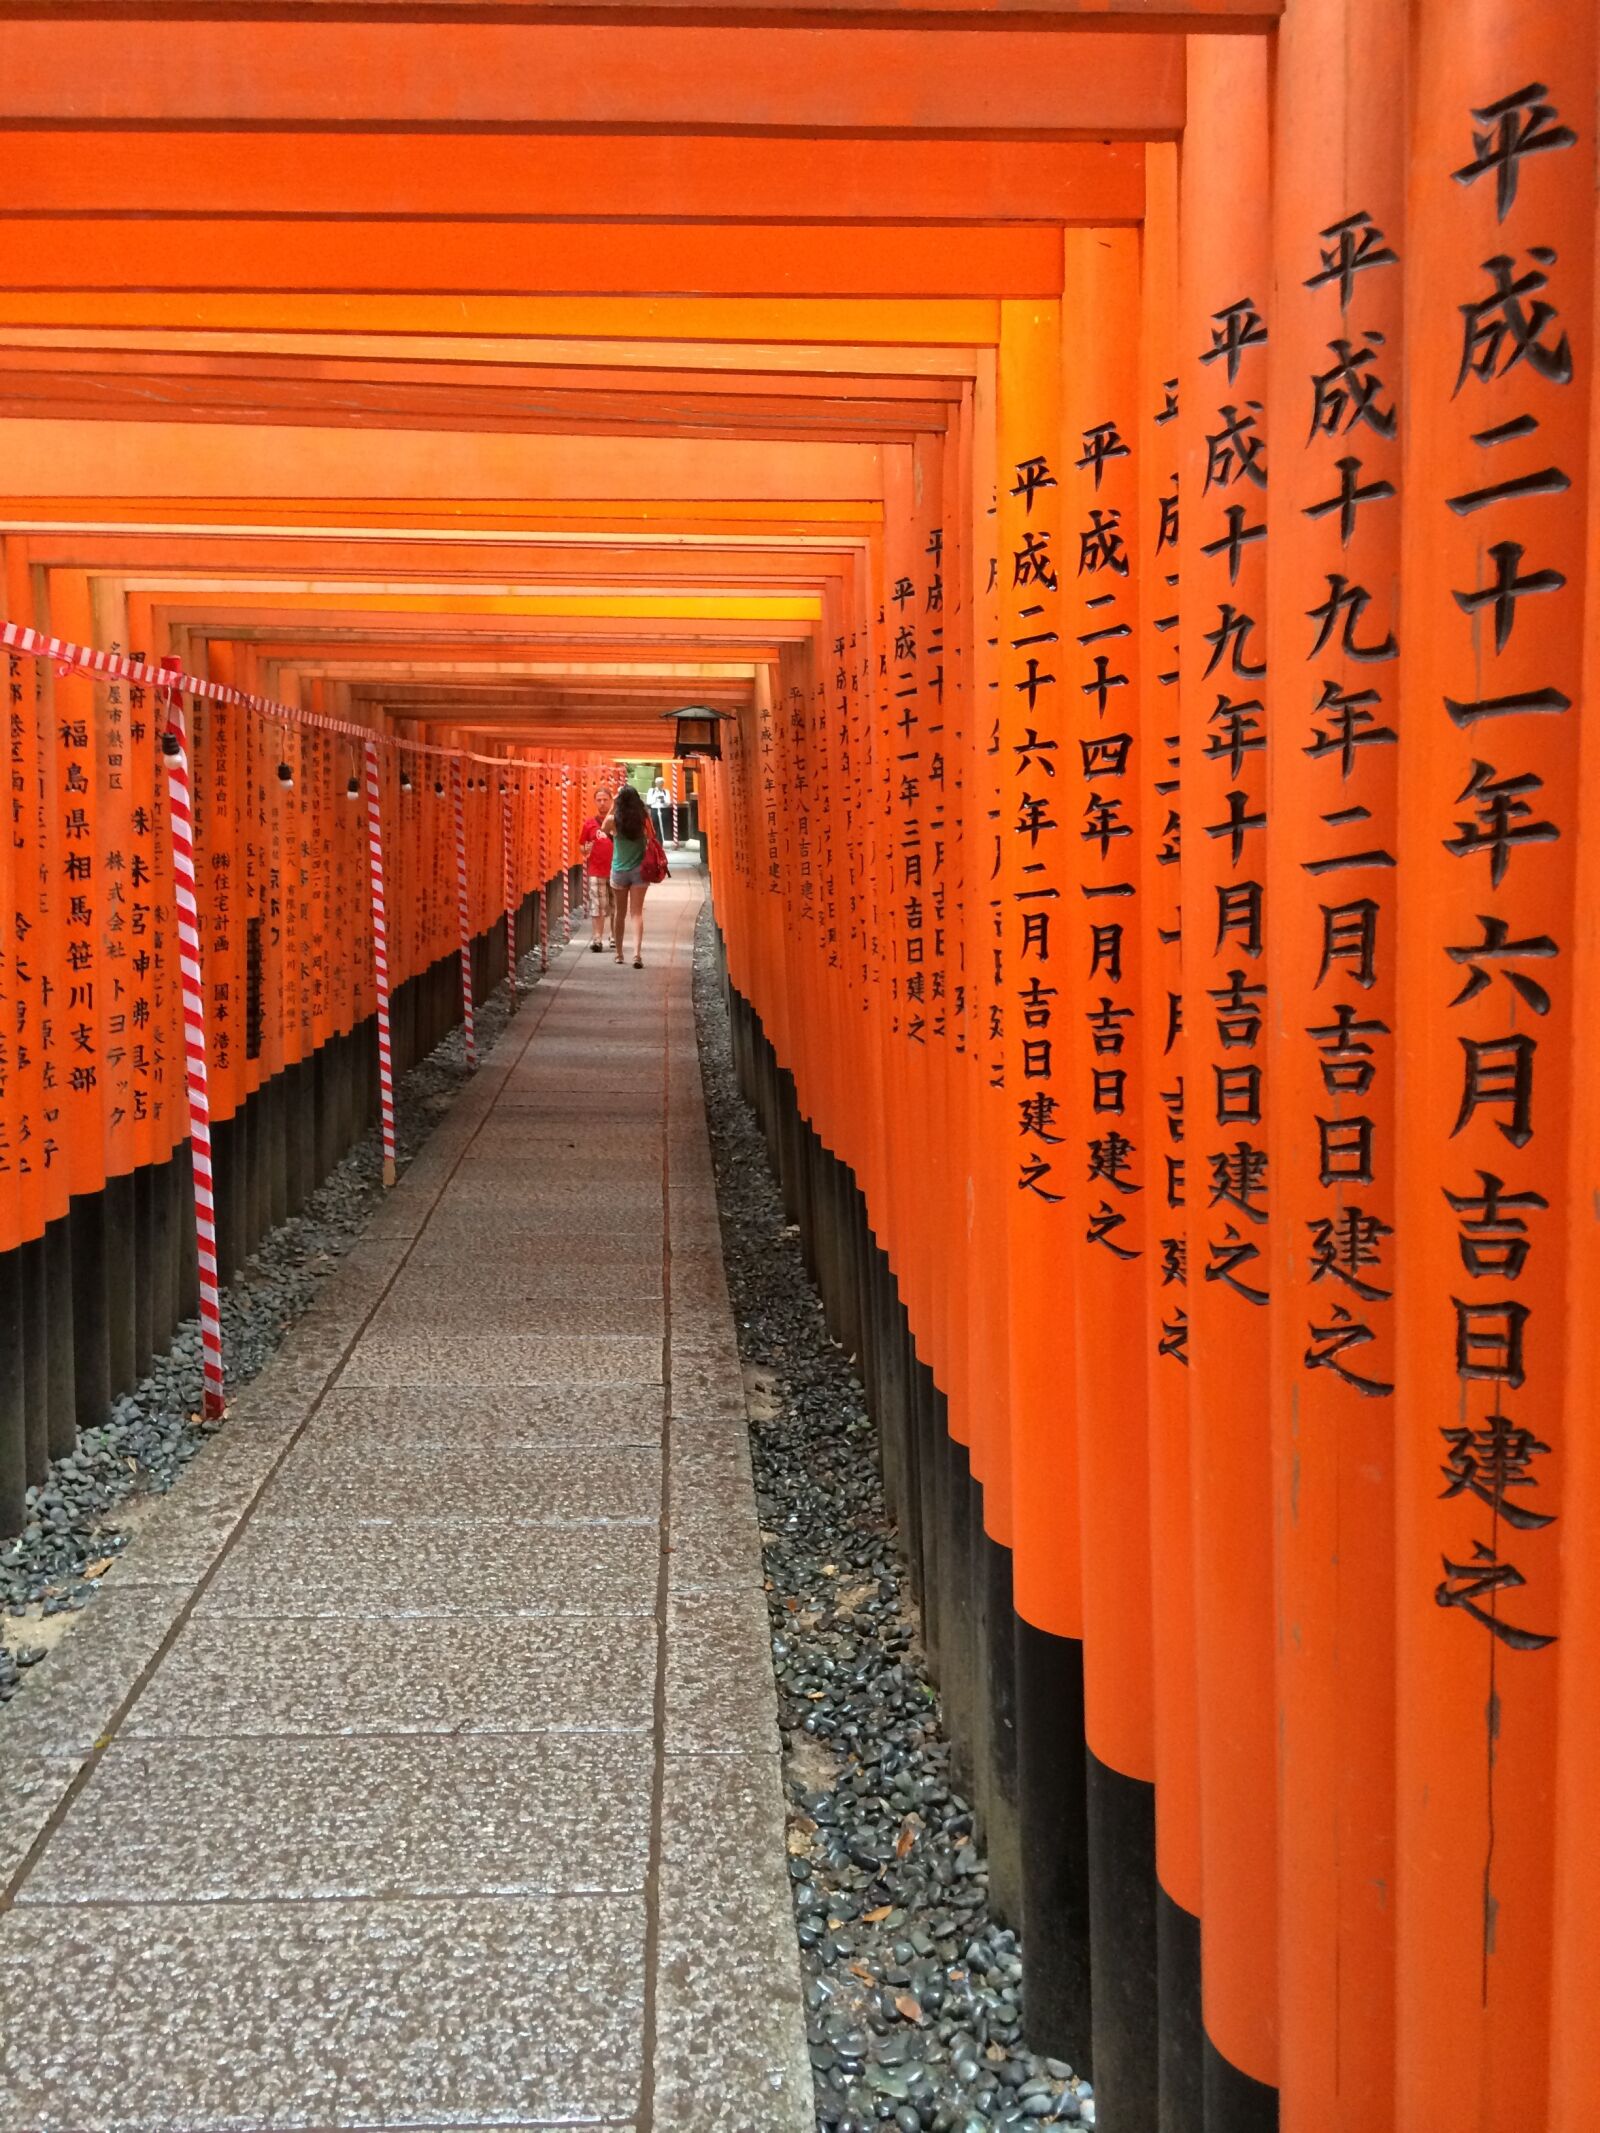 Apple iPhone 5s sample photo. Walkway of remembrance, kyoto photography